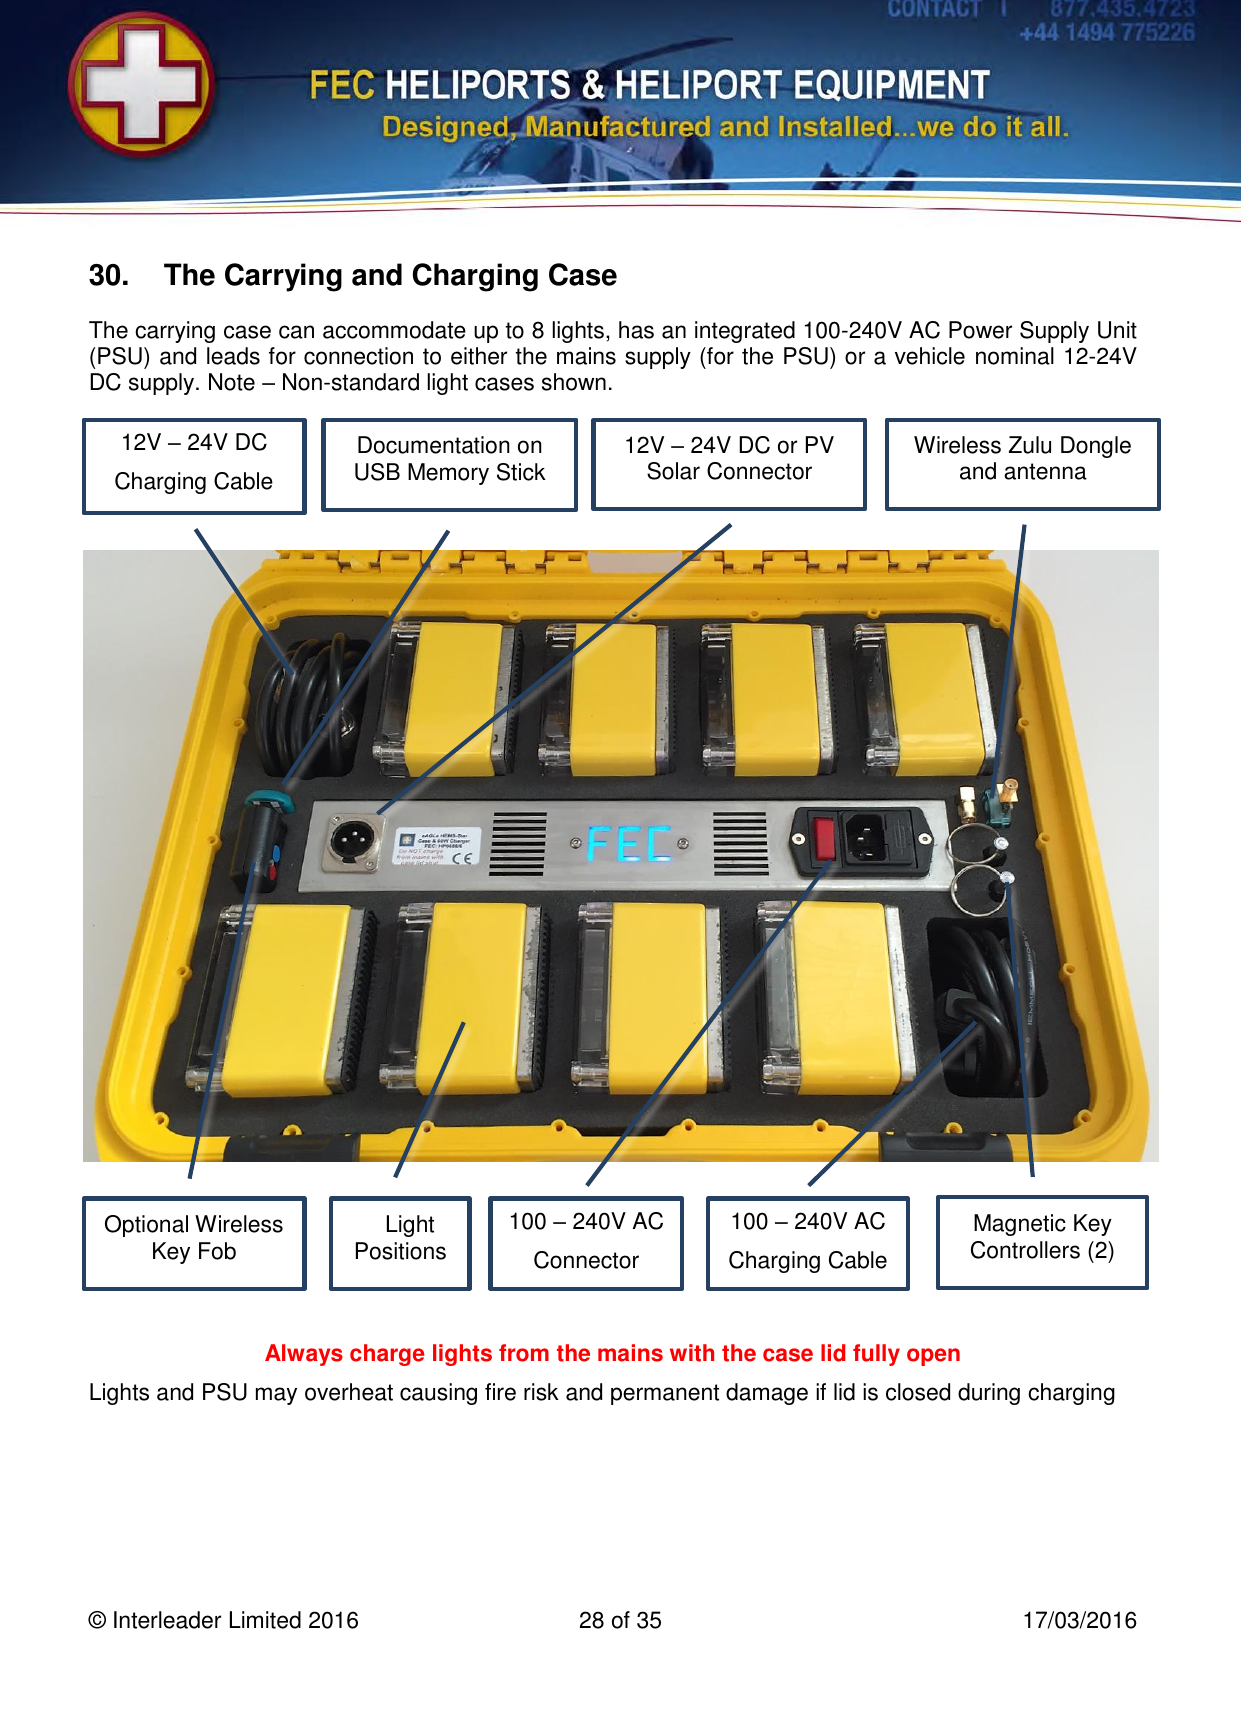   © Interleader Limited 2016  28 of 35  17/03/2016 30.  The Carrying and Charging Case The carrying case can accommodate up to 8 lights, has an integrated 100-240V AC Power Supply Unit (PSU) and leads for connection to either the mains supply (for the PSU) or a vehicle nominal 12-24V DC supply. Note – Non-standard light cases shown.                         Always charge lights from the mains with the case lid fully open Lights and PSU may overheat causing fire risk and permanent damage if lid is closed during charging Documentation on USB Memory Stick 8 Light Positions Magnetic Key Controllers (2) 12V – 24V DC Charging Cable 100 – 240V AC Charging Cable Optional Wireless Key Fob 12V – 24V DC or PV Solar Connector 100 – 240V AC Connector Wireless Zulu Dongle and antenna 